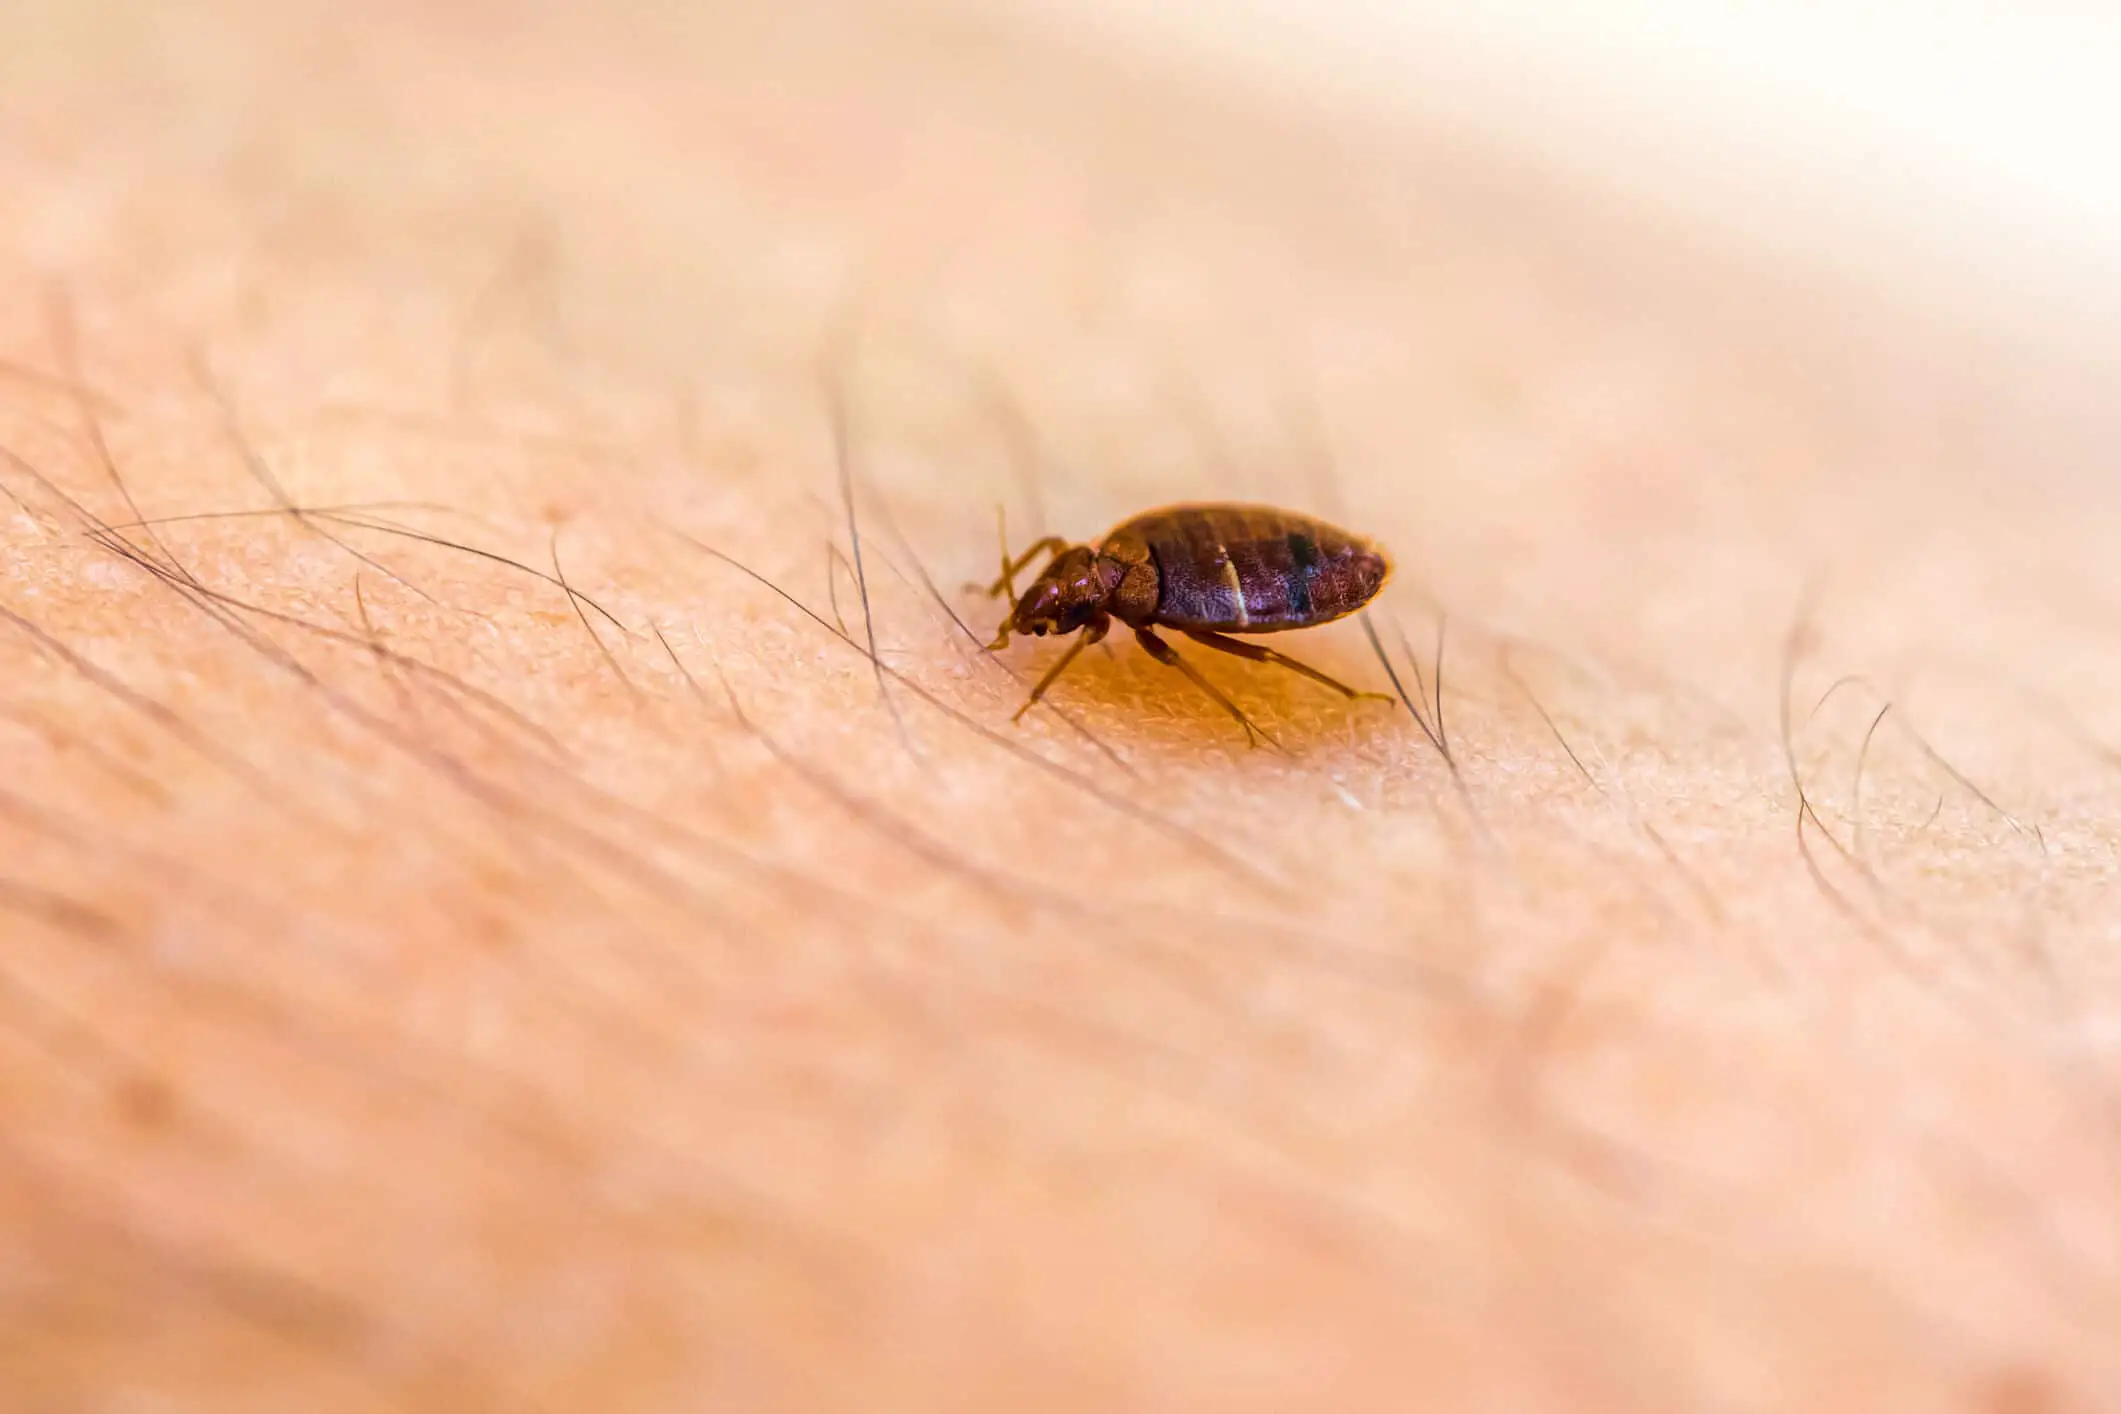 Can You Travel With Bed Bug Bites?